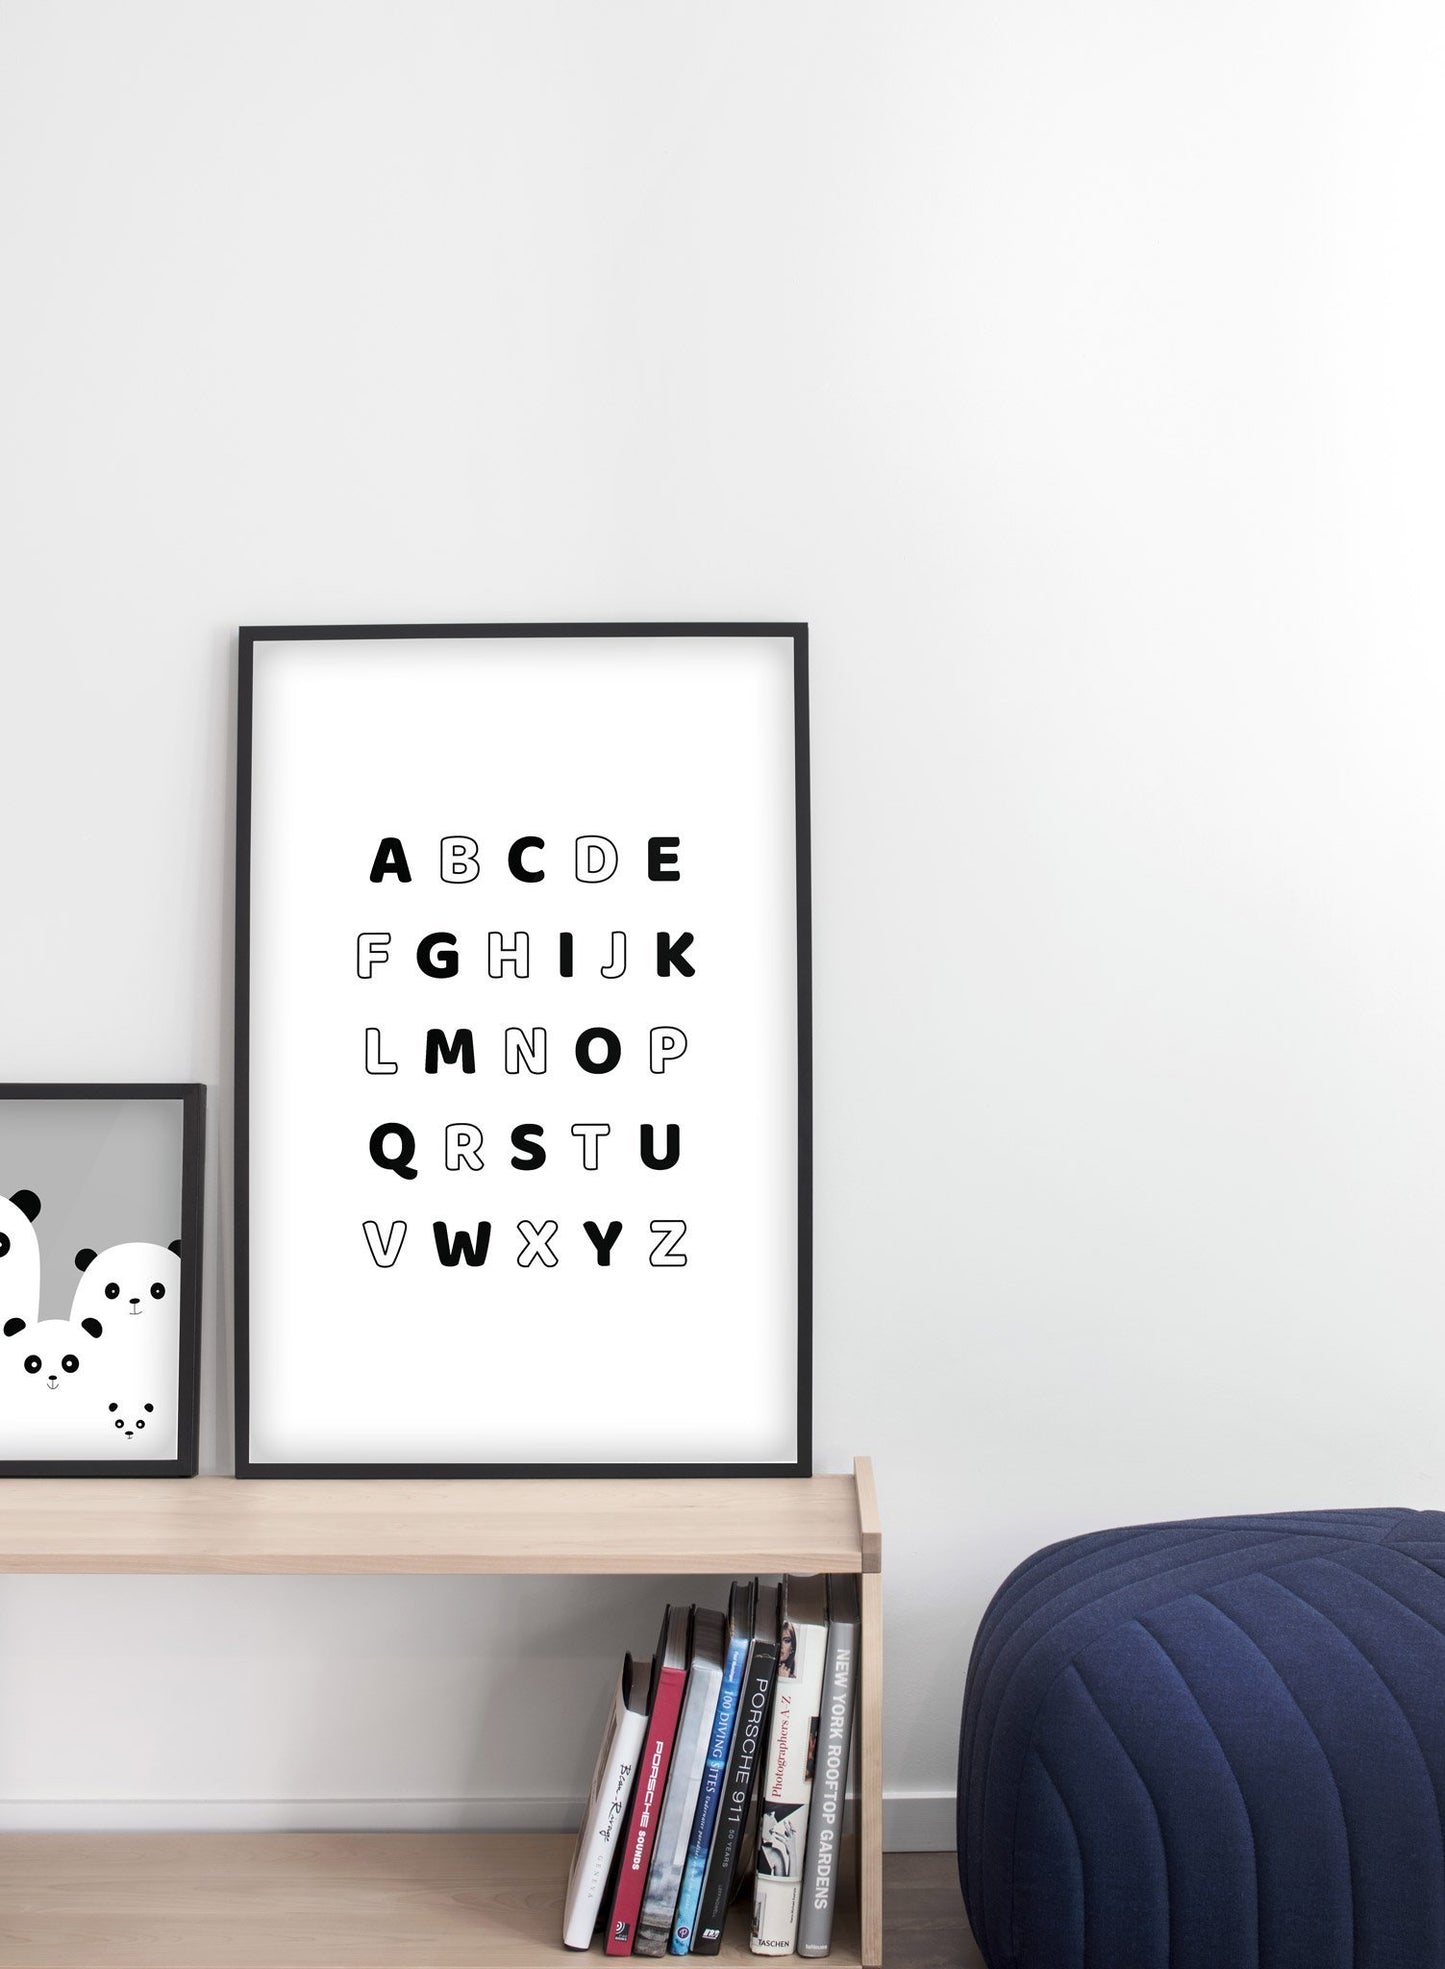 Modern minimalist poster by Opposite Wall with Alphabet illustration in black and white - kids collection - personal office